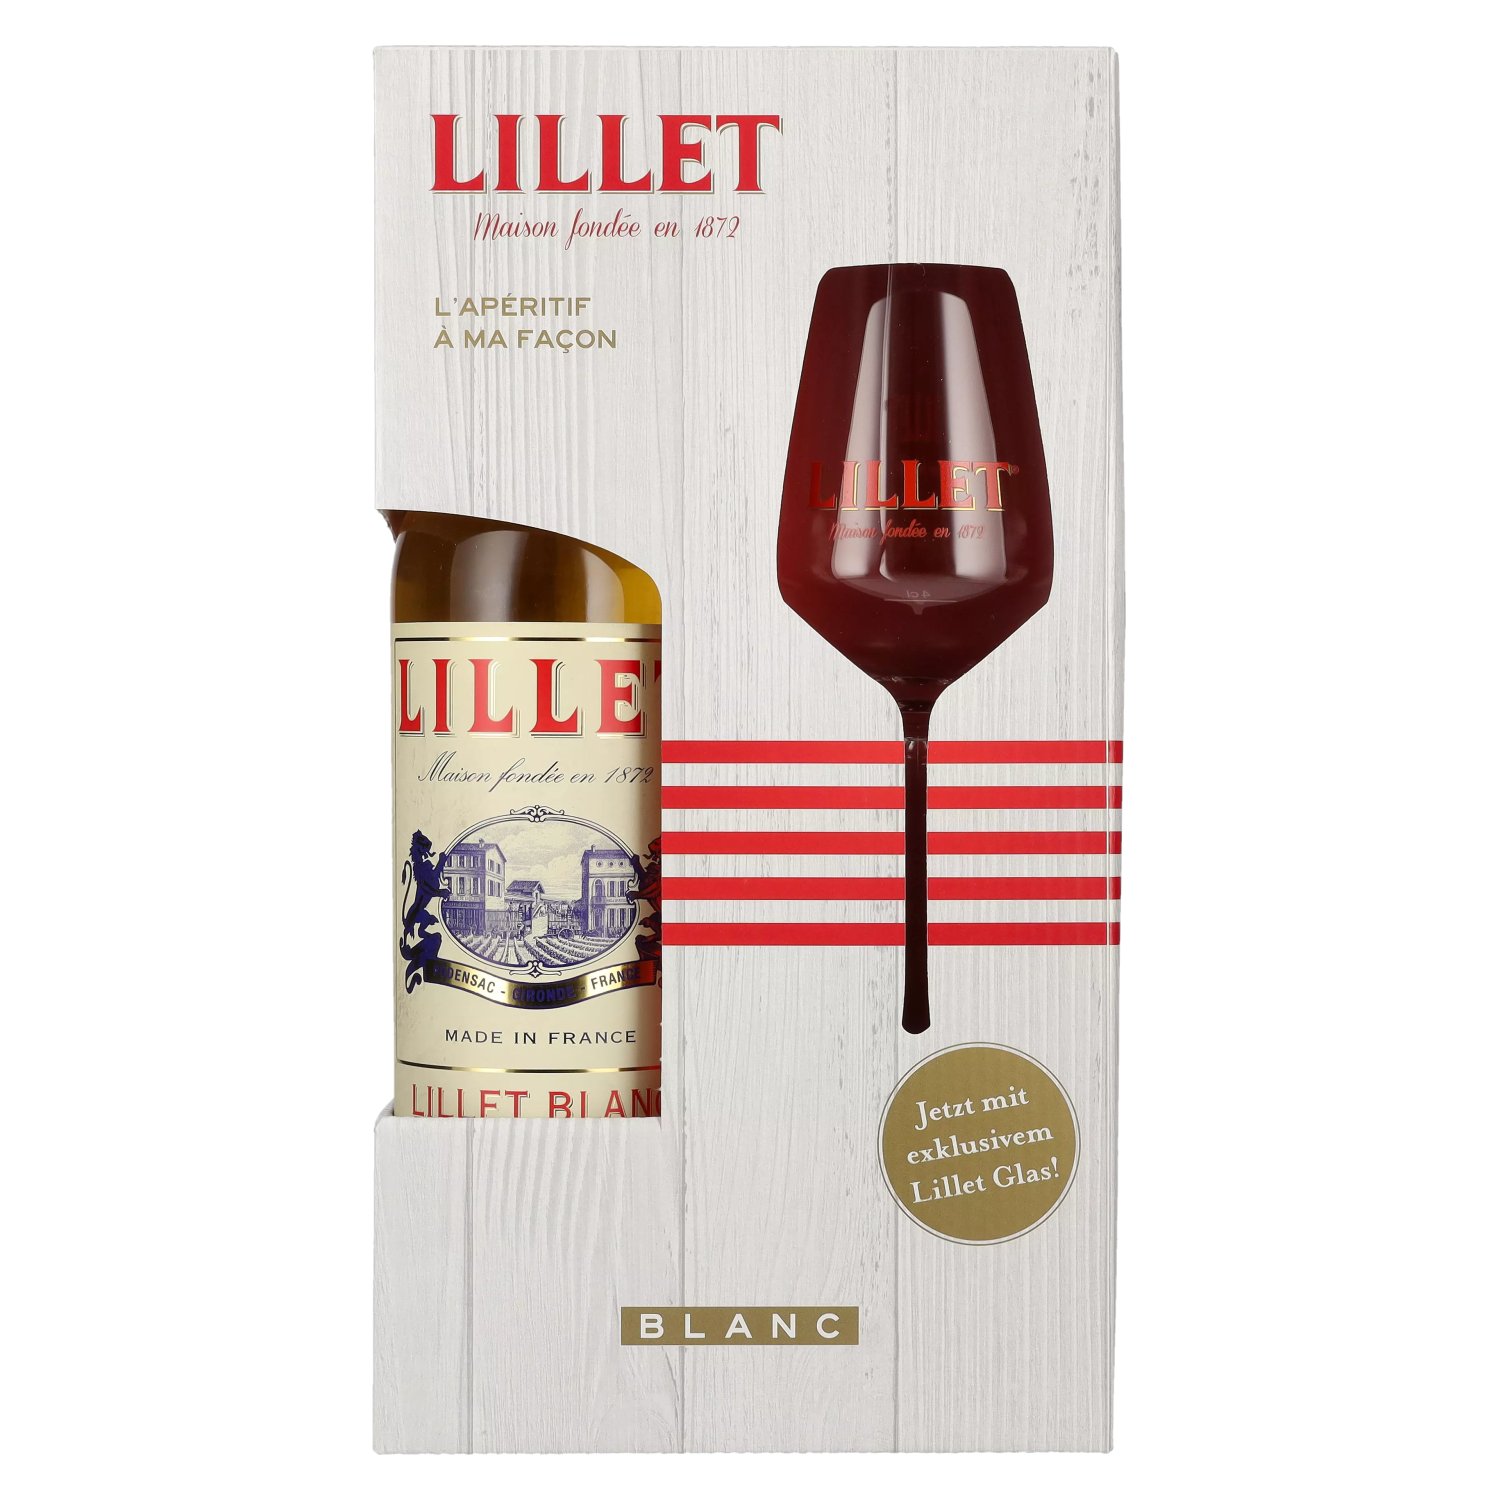 Lillet Blanc 17% Vol. 0,75l in with glass Giftbox